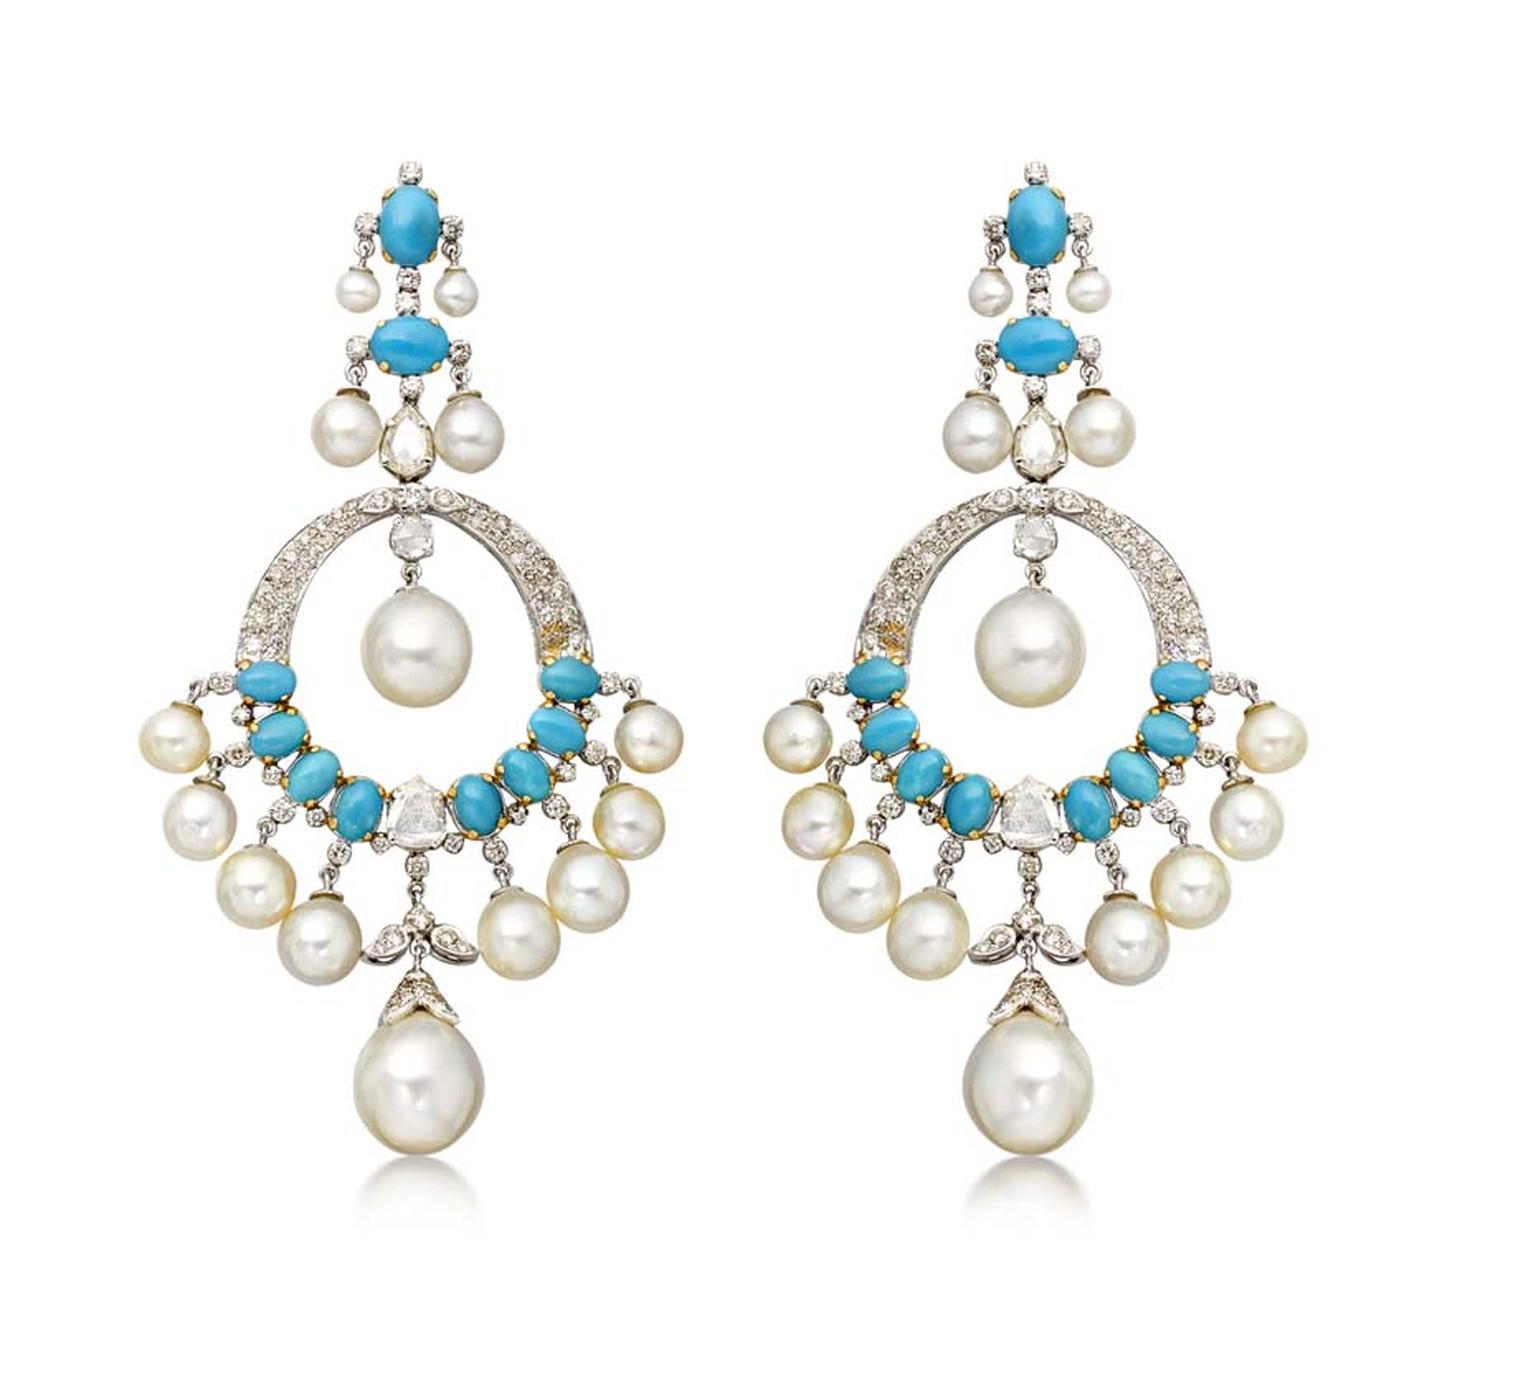 Amrapali earrings featuring pearls, turquoise and diamonds